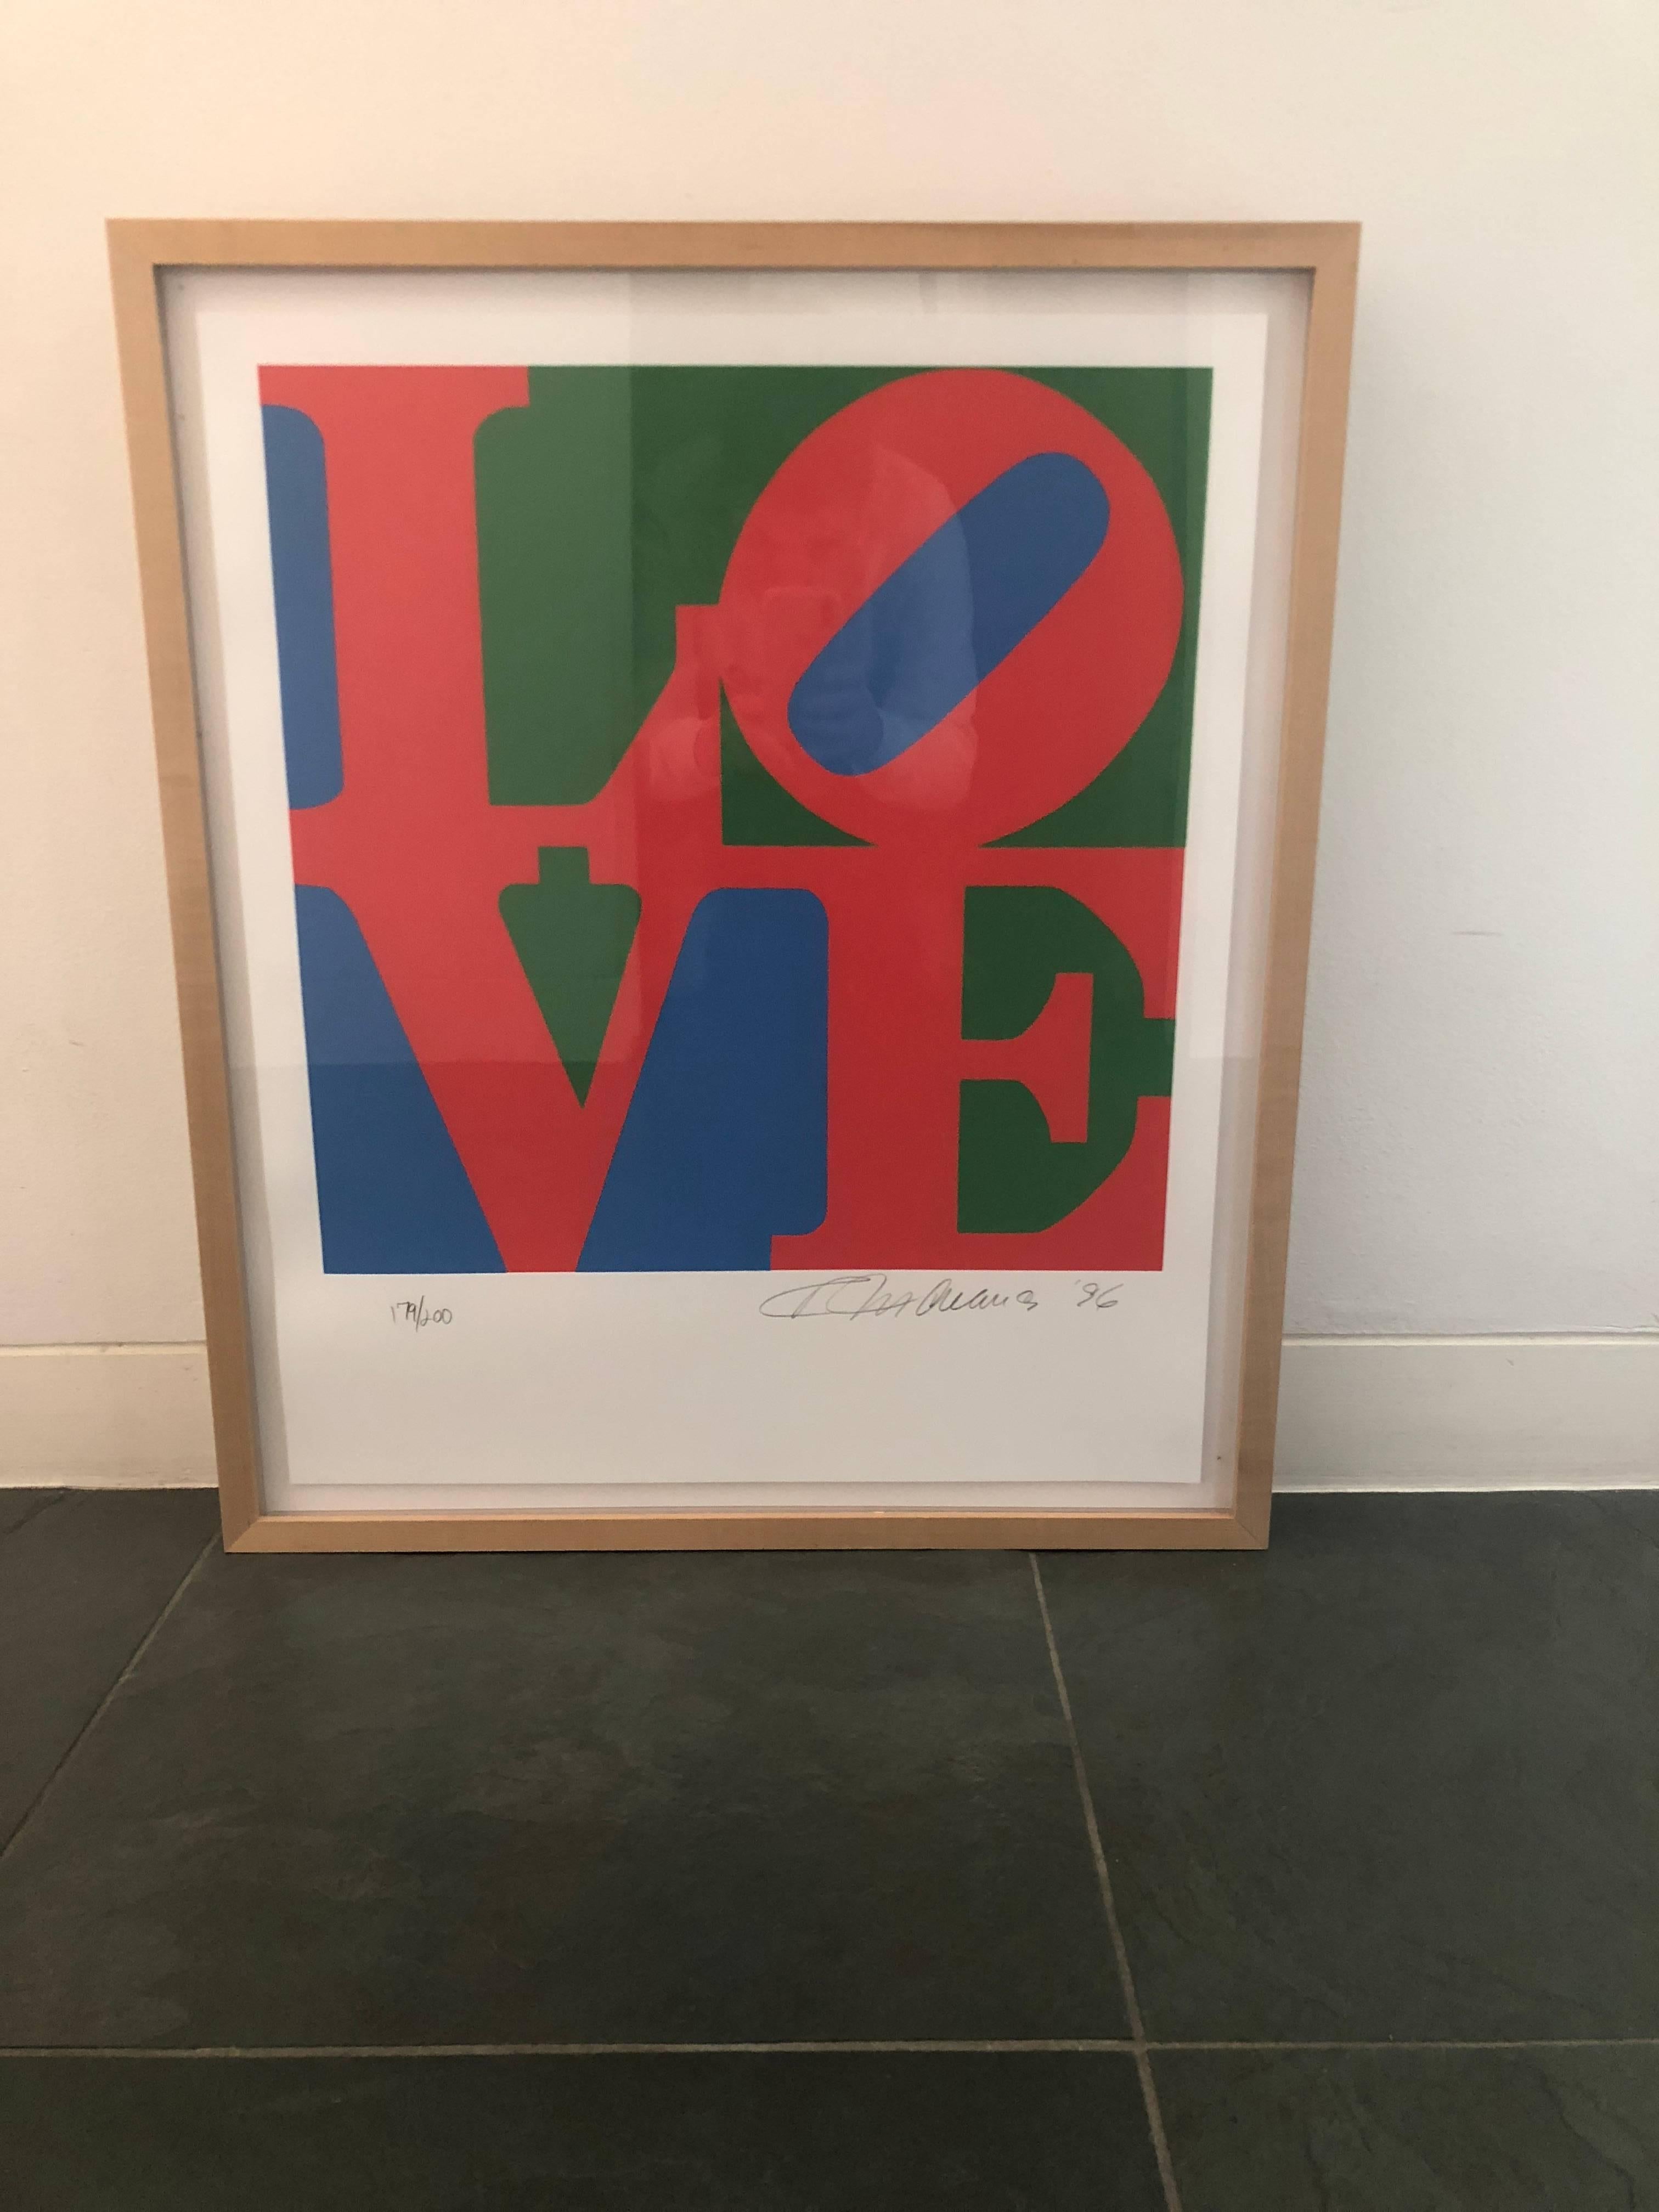 Offered is a 20th century Pop Art screenprint, signed and numbered Robert Indiana (1928-2018) - Book of Love: one plate, 1996. Love (Green, Red, Blue), 1996.
Screen-print in colors, on A.N.W. Crestwood Museum Edition paper
Signed, dated and numbered